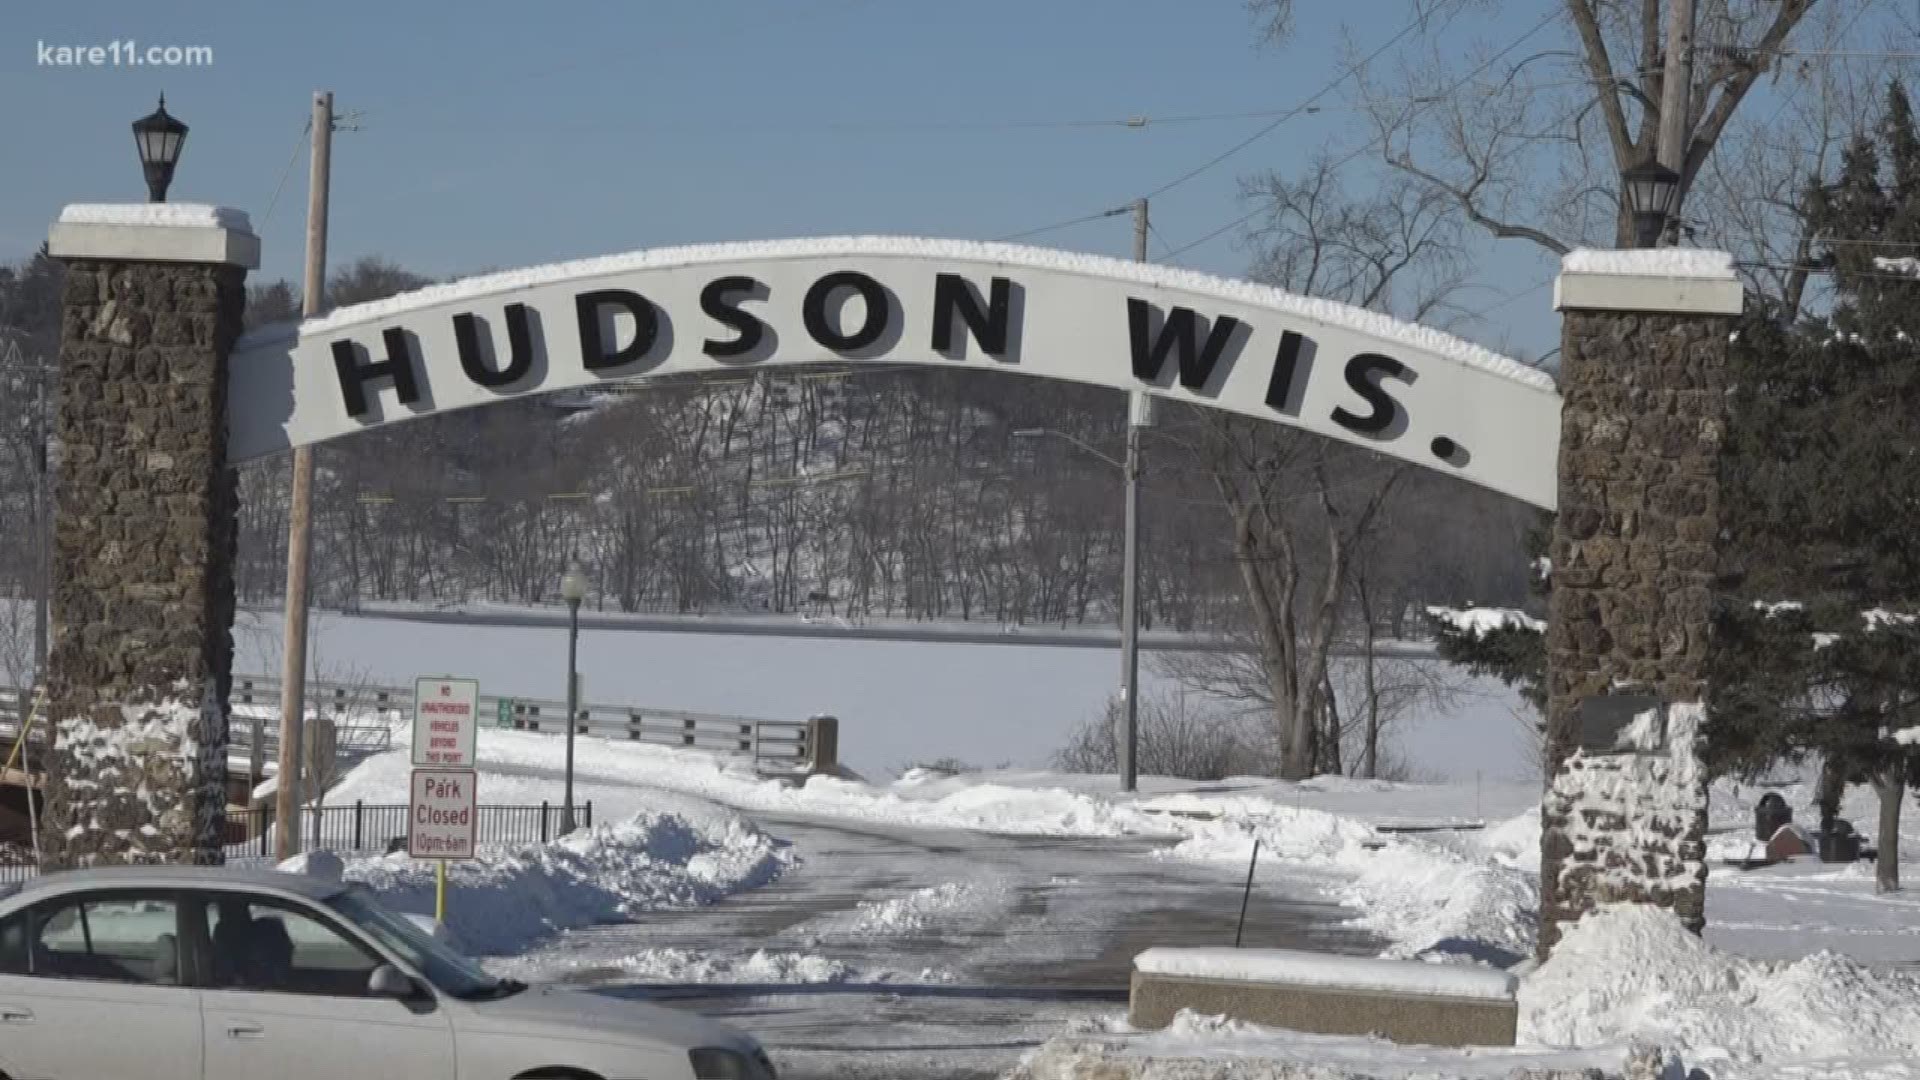 For this week's UNZIPPED, KARE 11's Ellery McCardle and Alicia Lewis headed to Hudson, Wisconsin, and quickly learned the people here are pretty great.